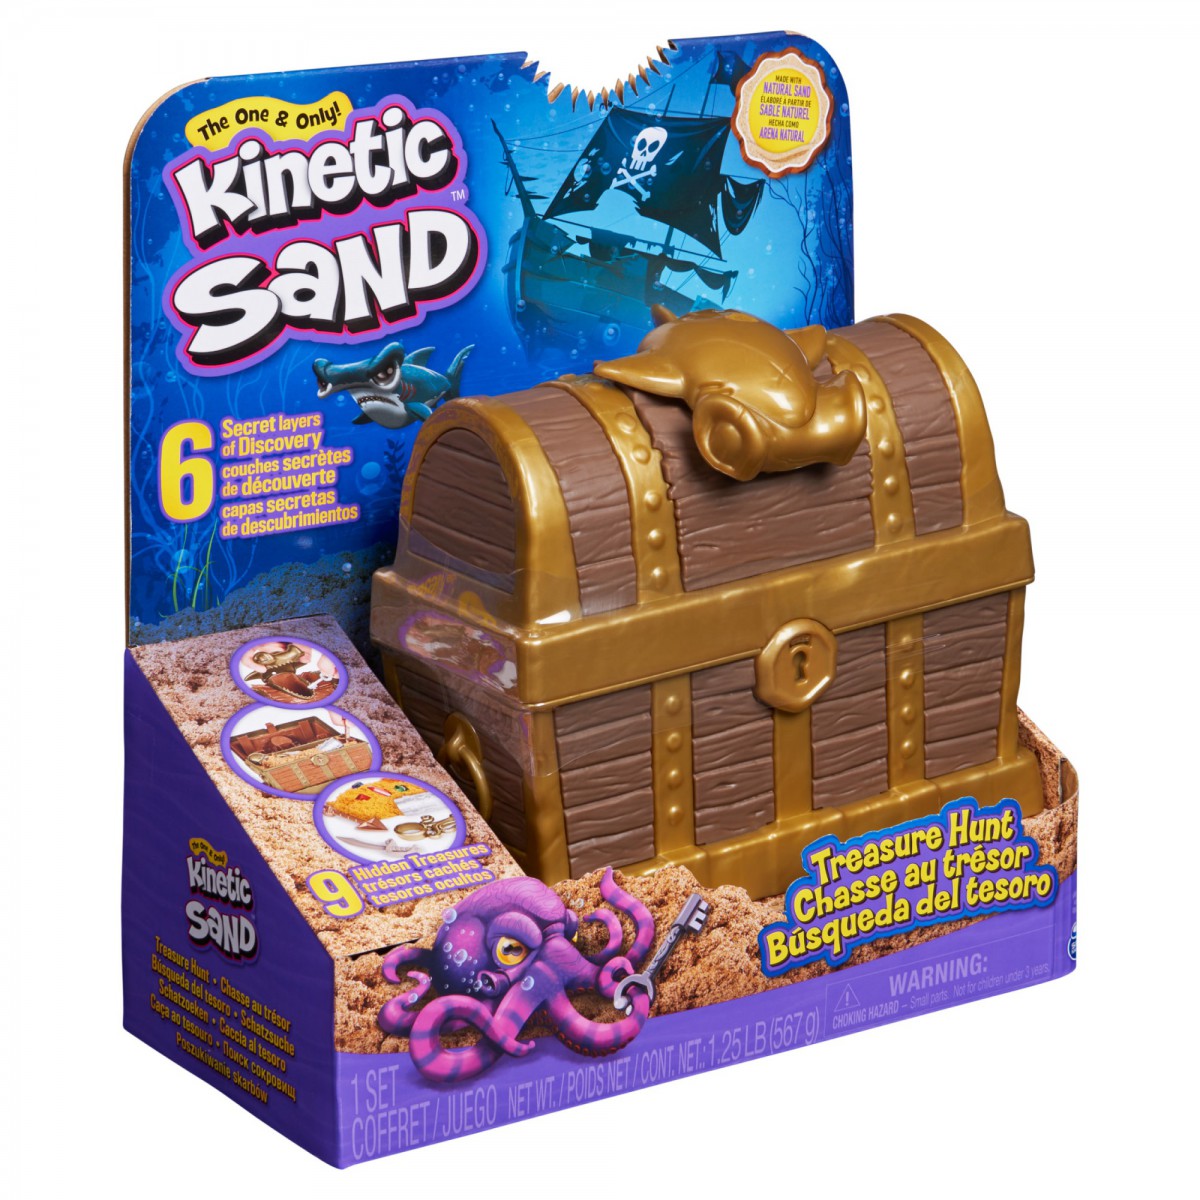 KINETIC SAND BOX SET - PLAYNOW! Toys and Games